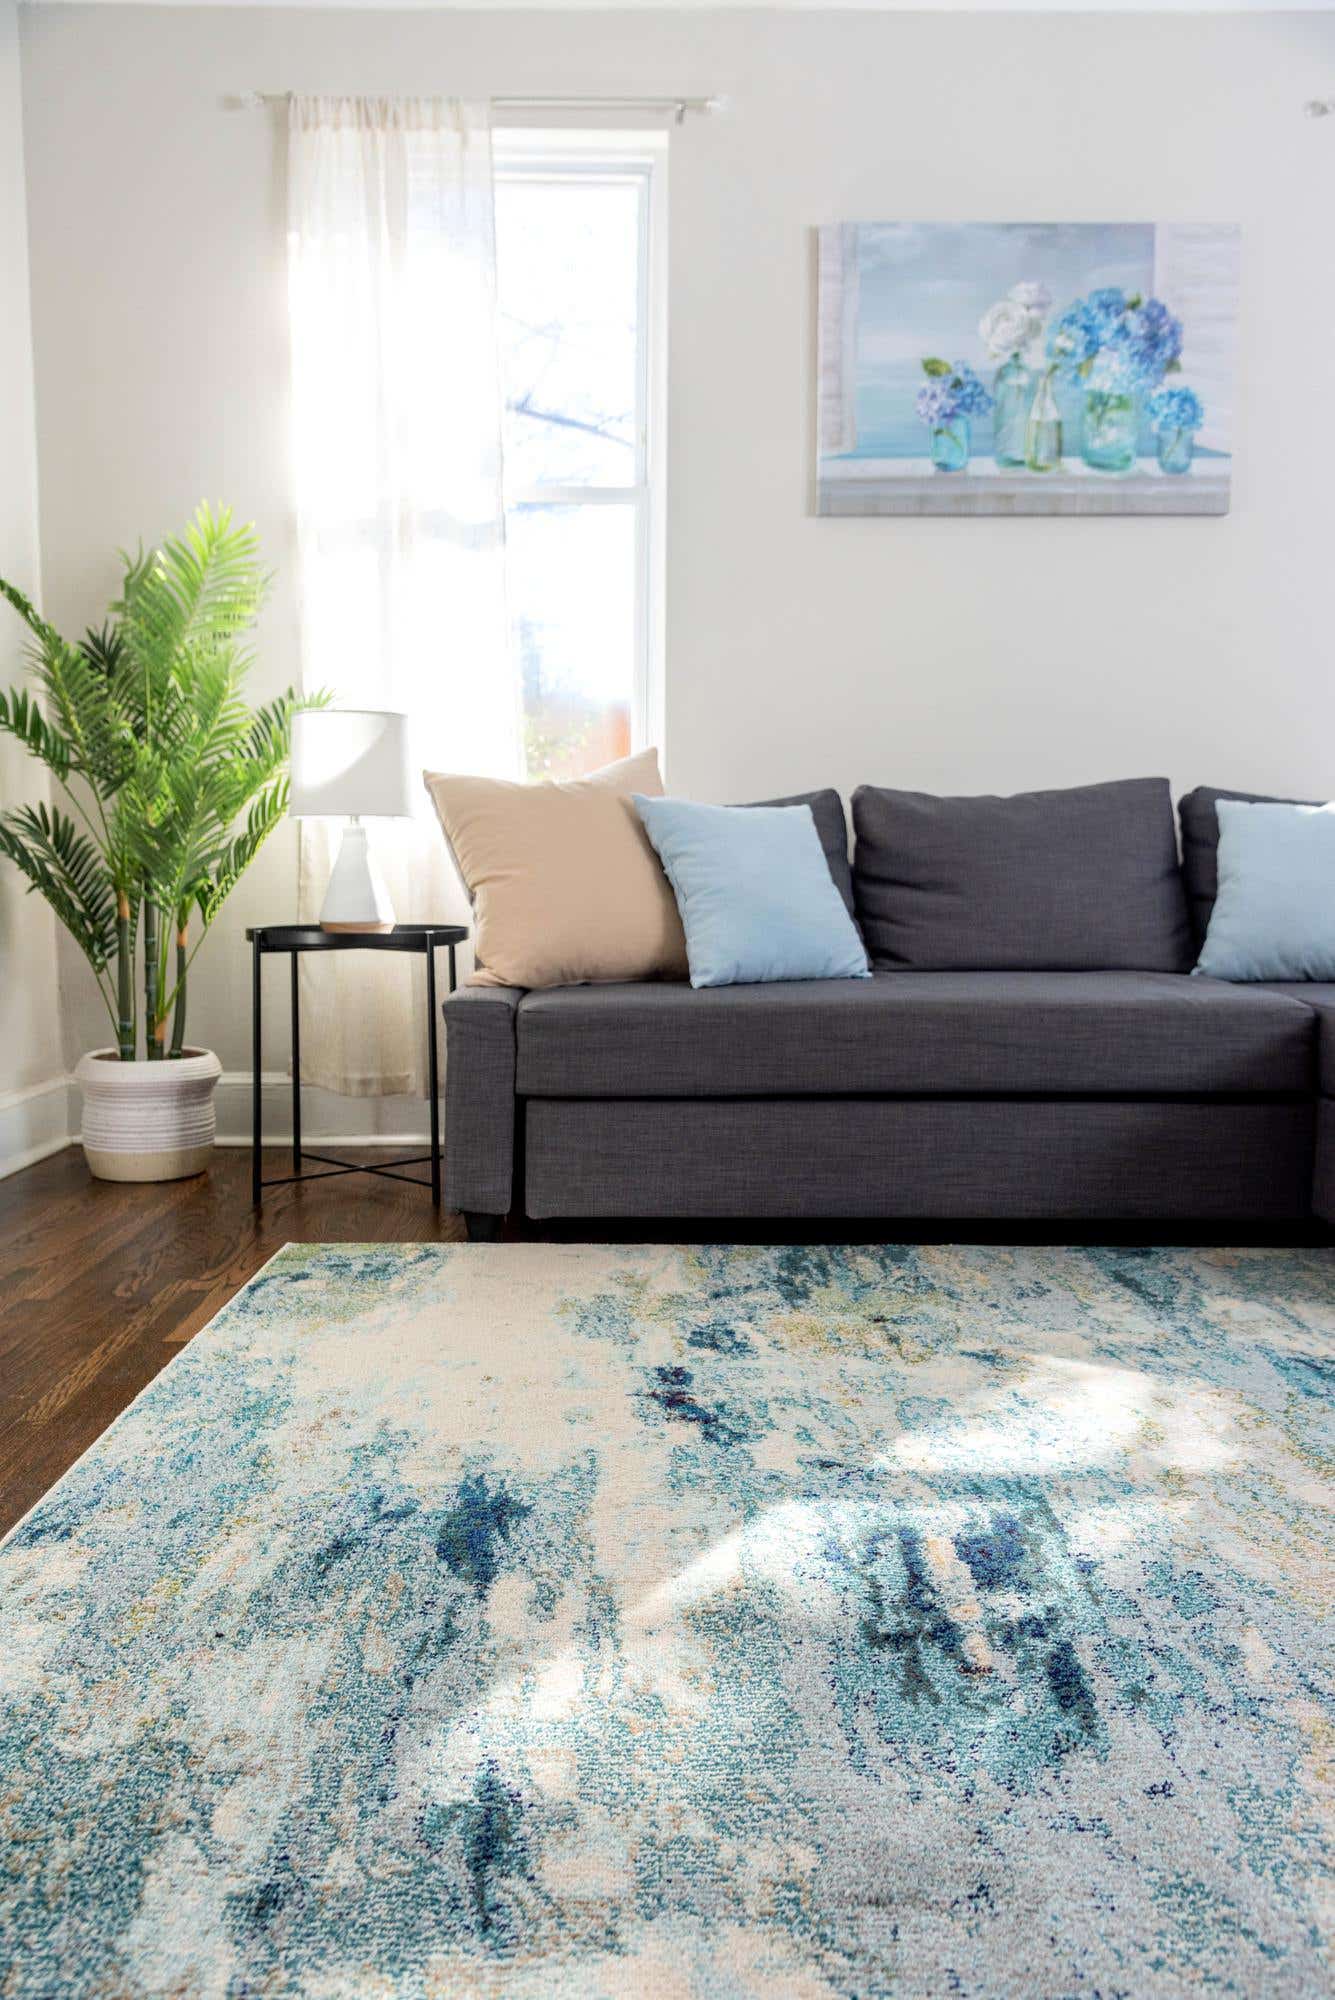 Coastal feel with the patterned area rug from Rugs.com